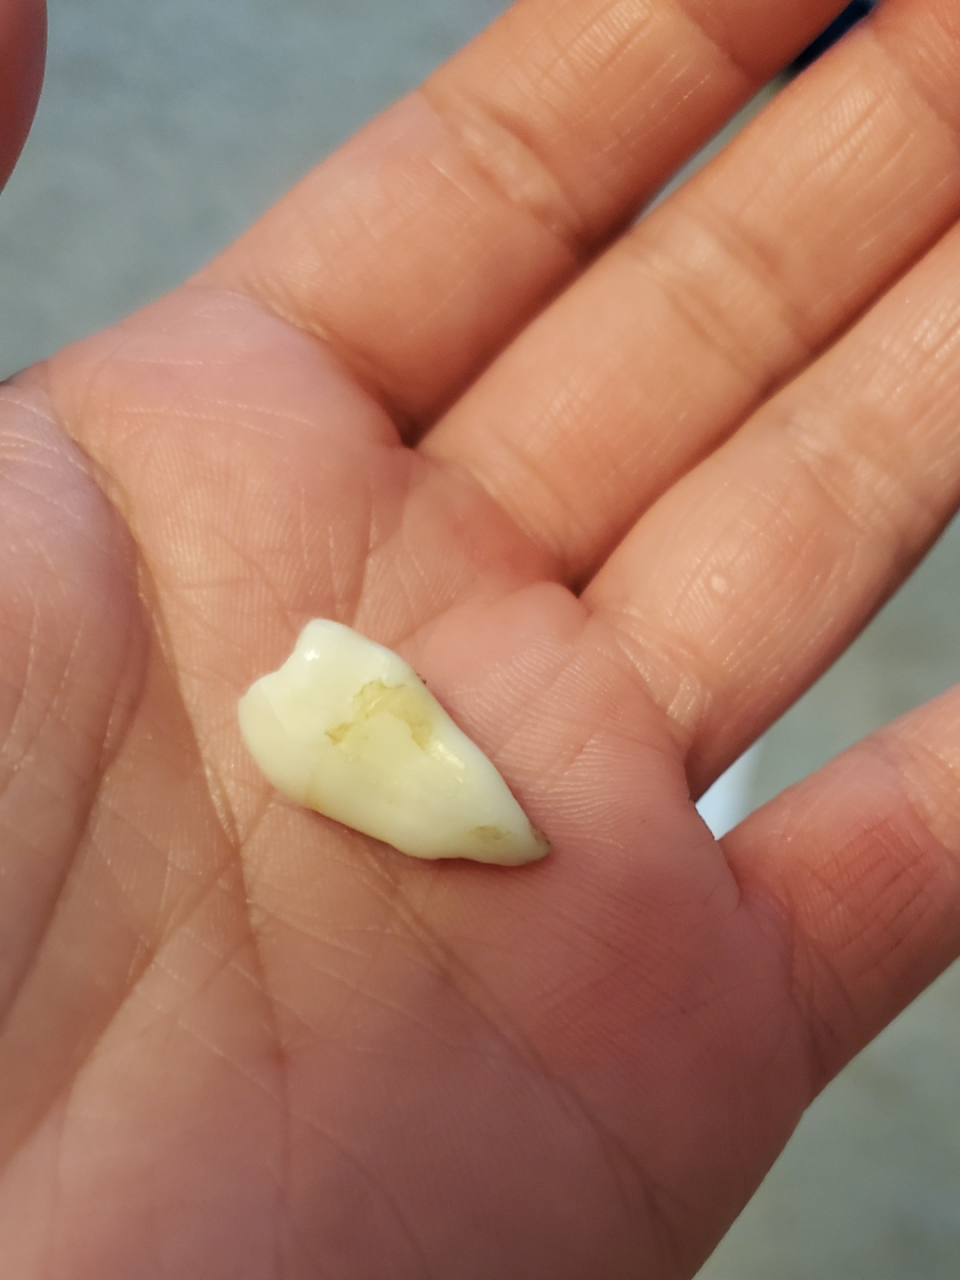 A tooth with just one large root